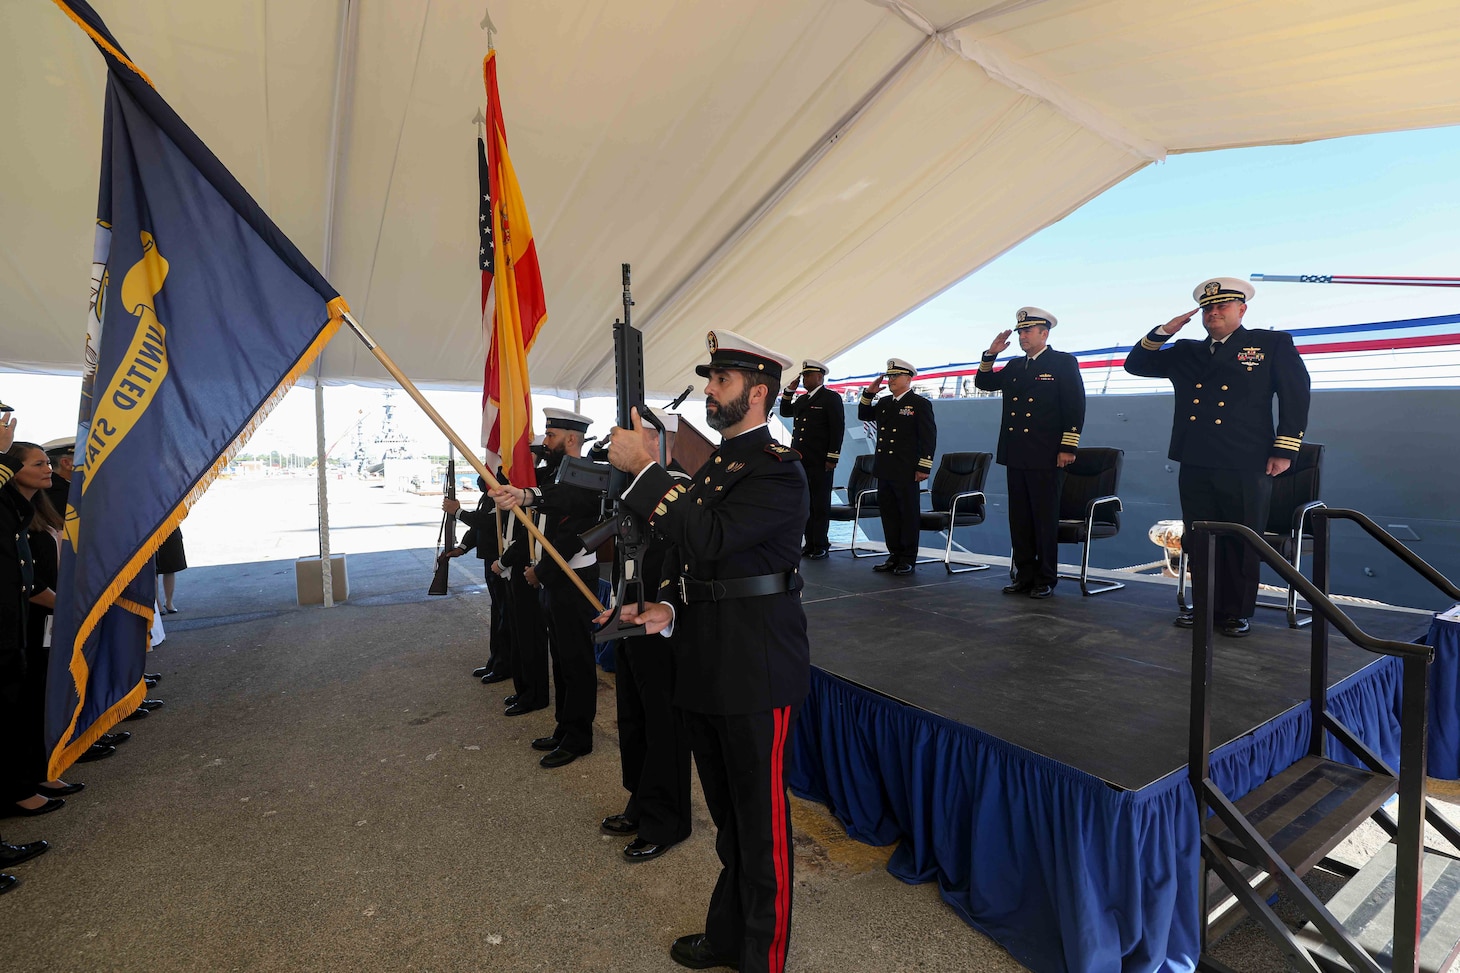 USS Africa Fleet of U.S. Change > Ceremony Forces > Europe U.S. Naval Display Holds Porter Sixth Command and News /